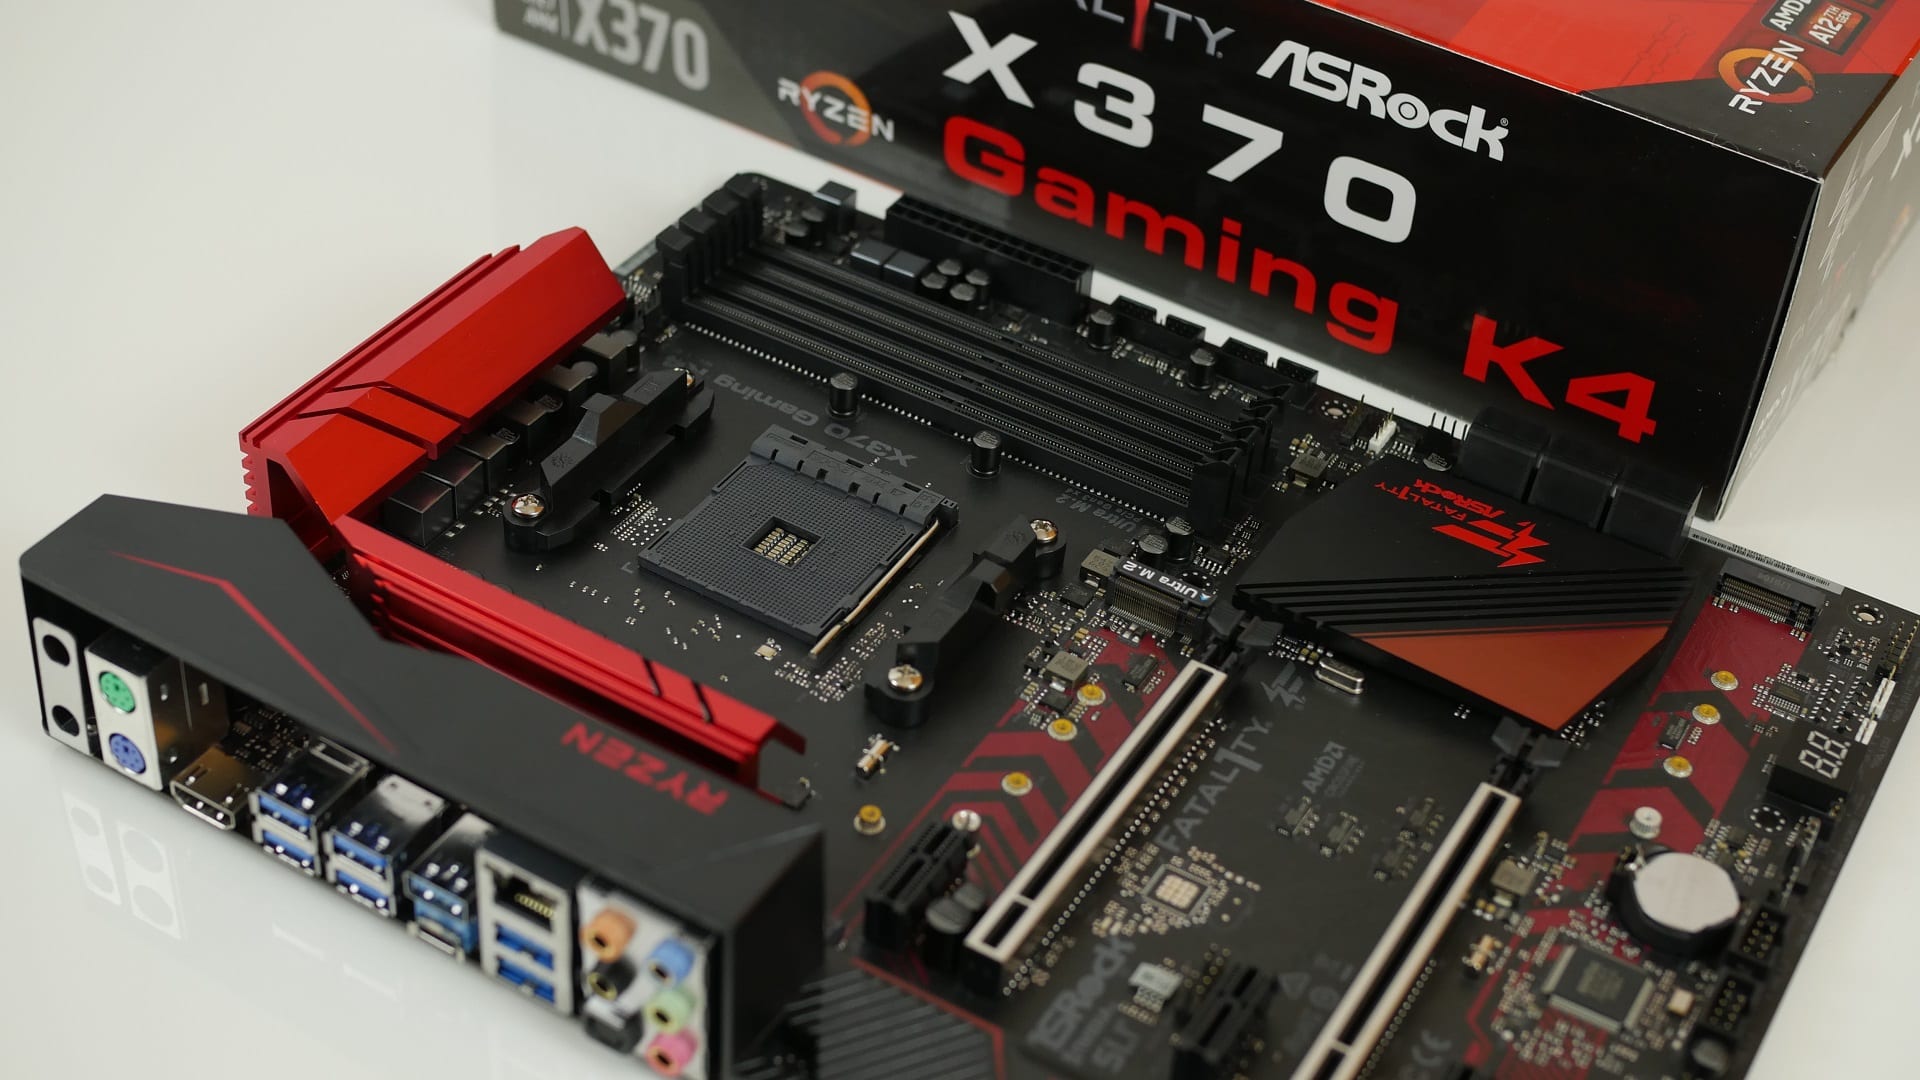 Parity Asrock X370 Gaming K4 Up To 74 Off